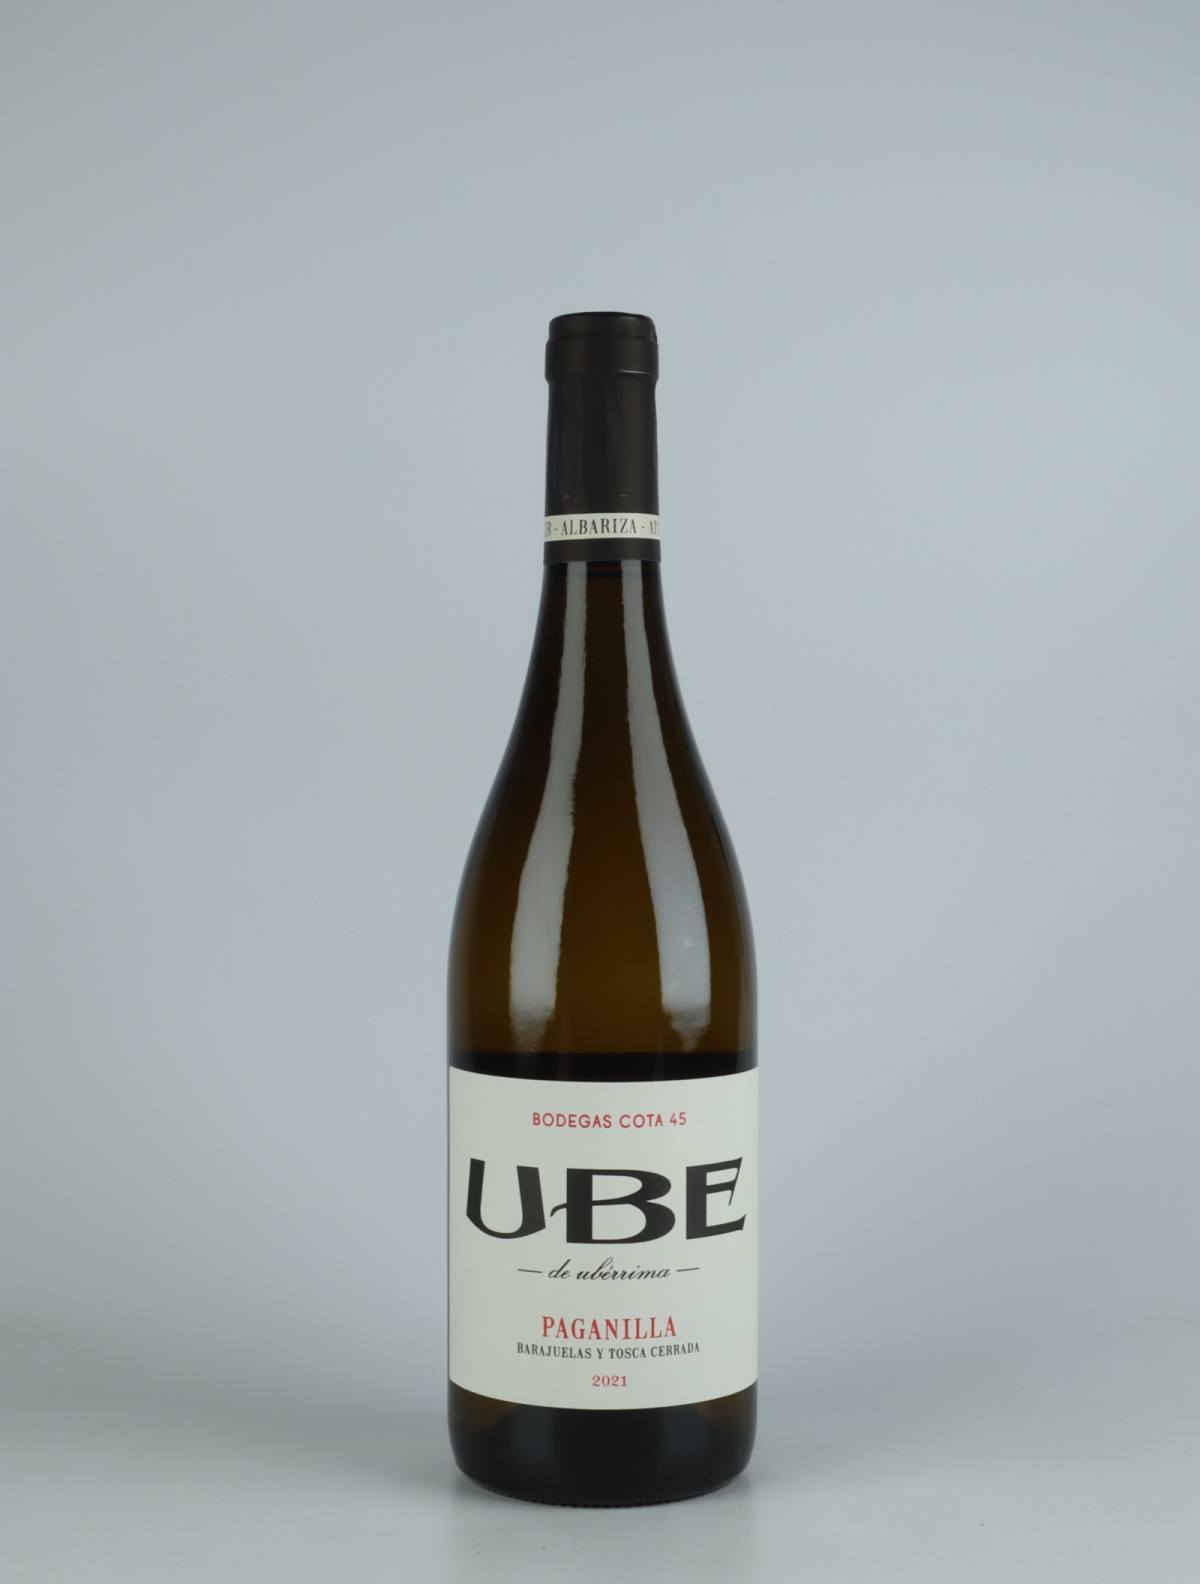 A bottle 2021 UBE Paganilla White wine from Bodegas Cota 45, Andalucia in Spain